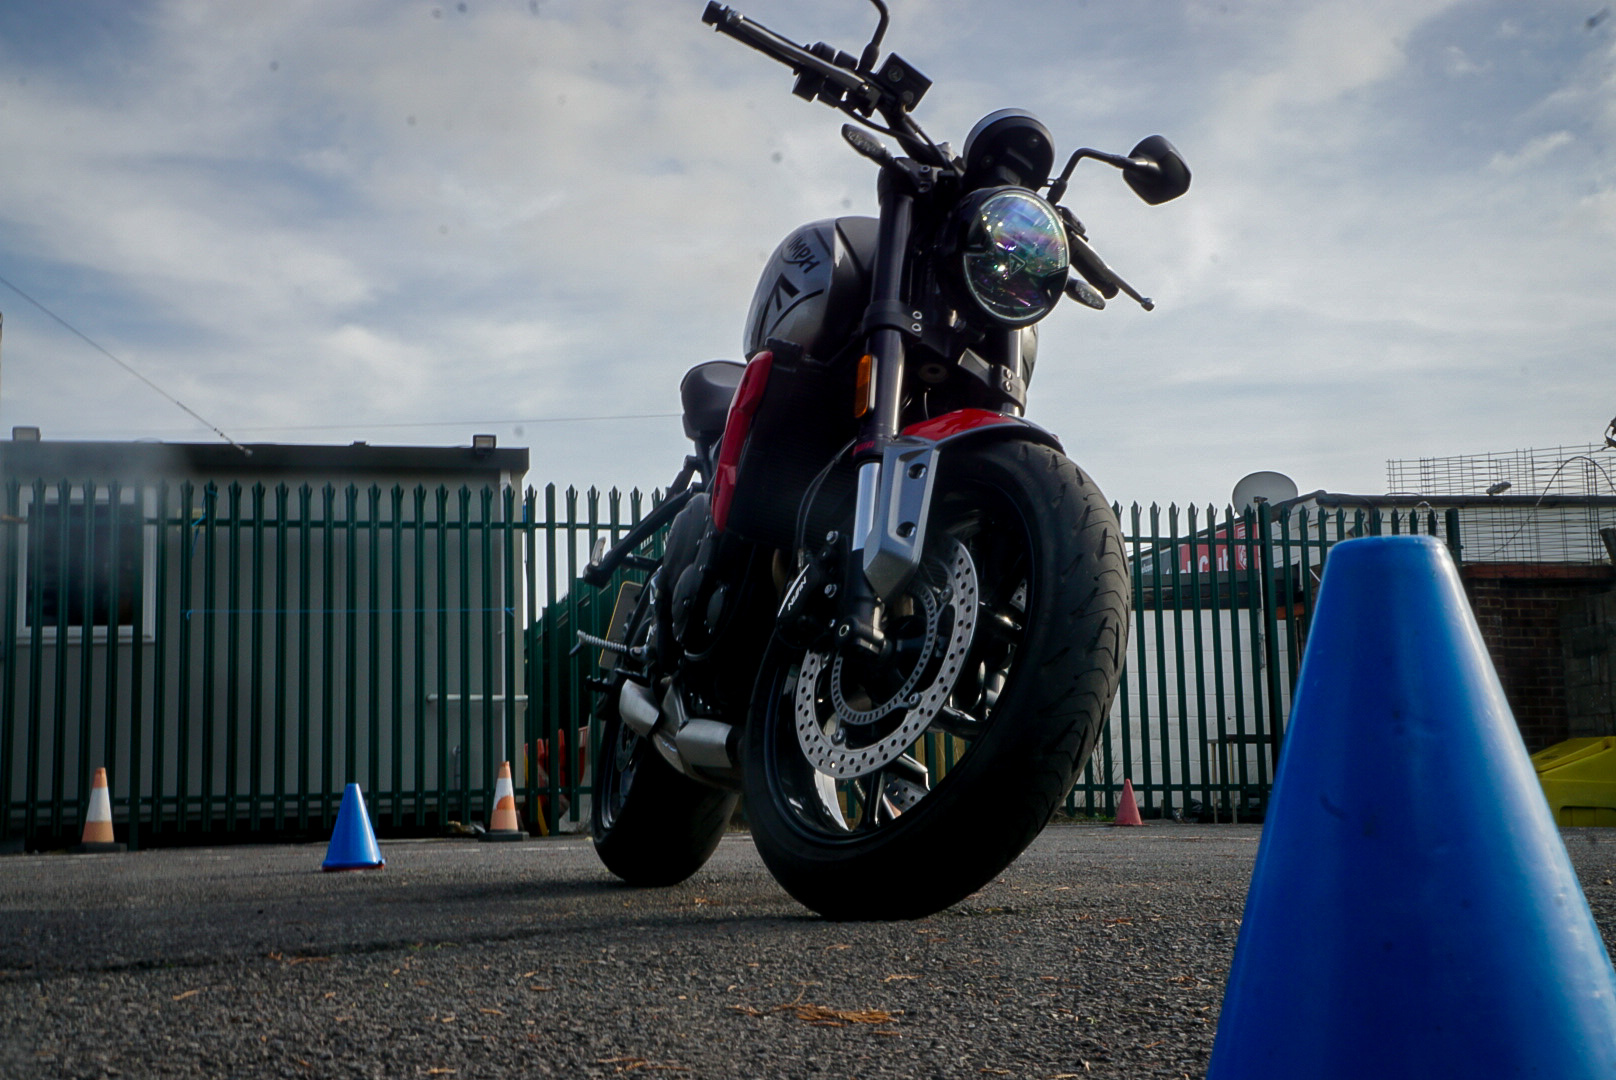 Motorcycle Test